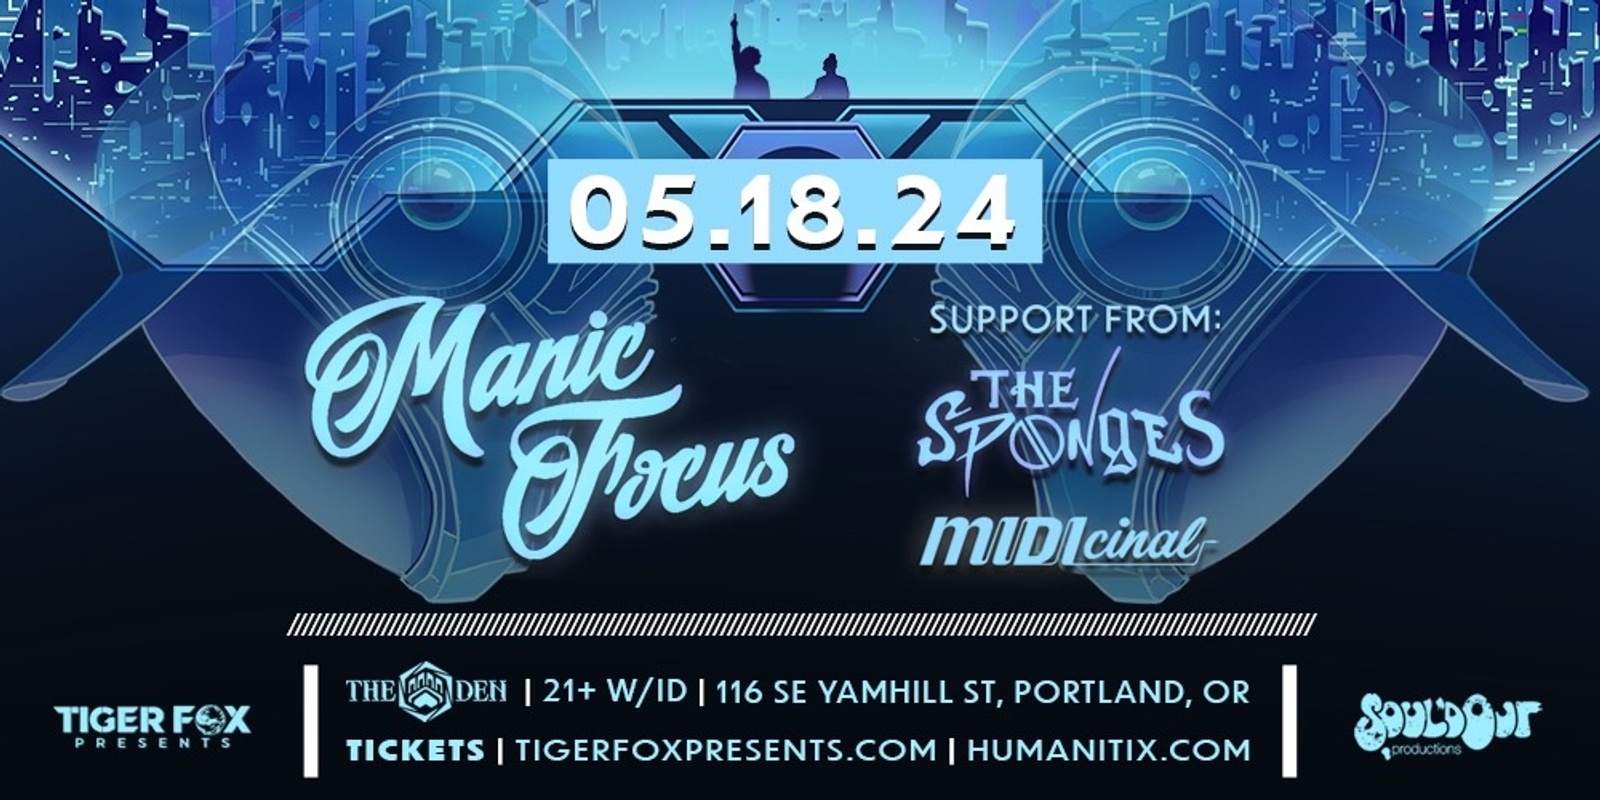 Banner image for Manic Focus • The Sponges • MIDIcinal •  The Den Portland, OR